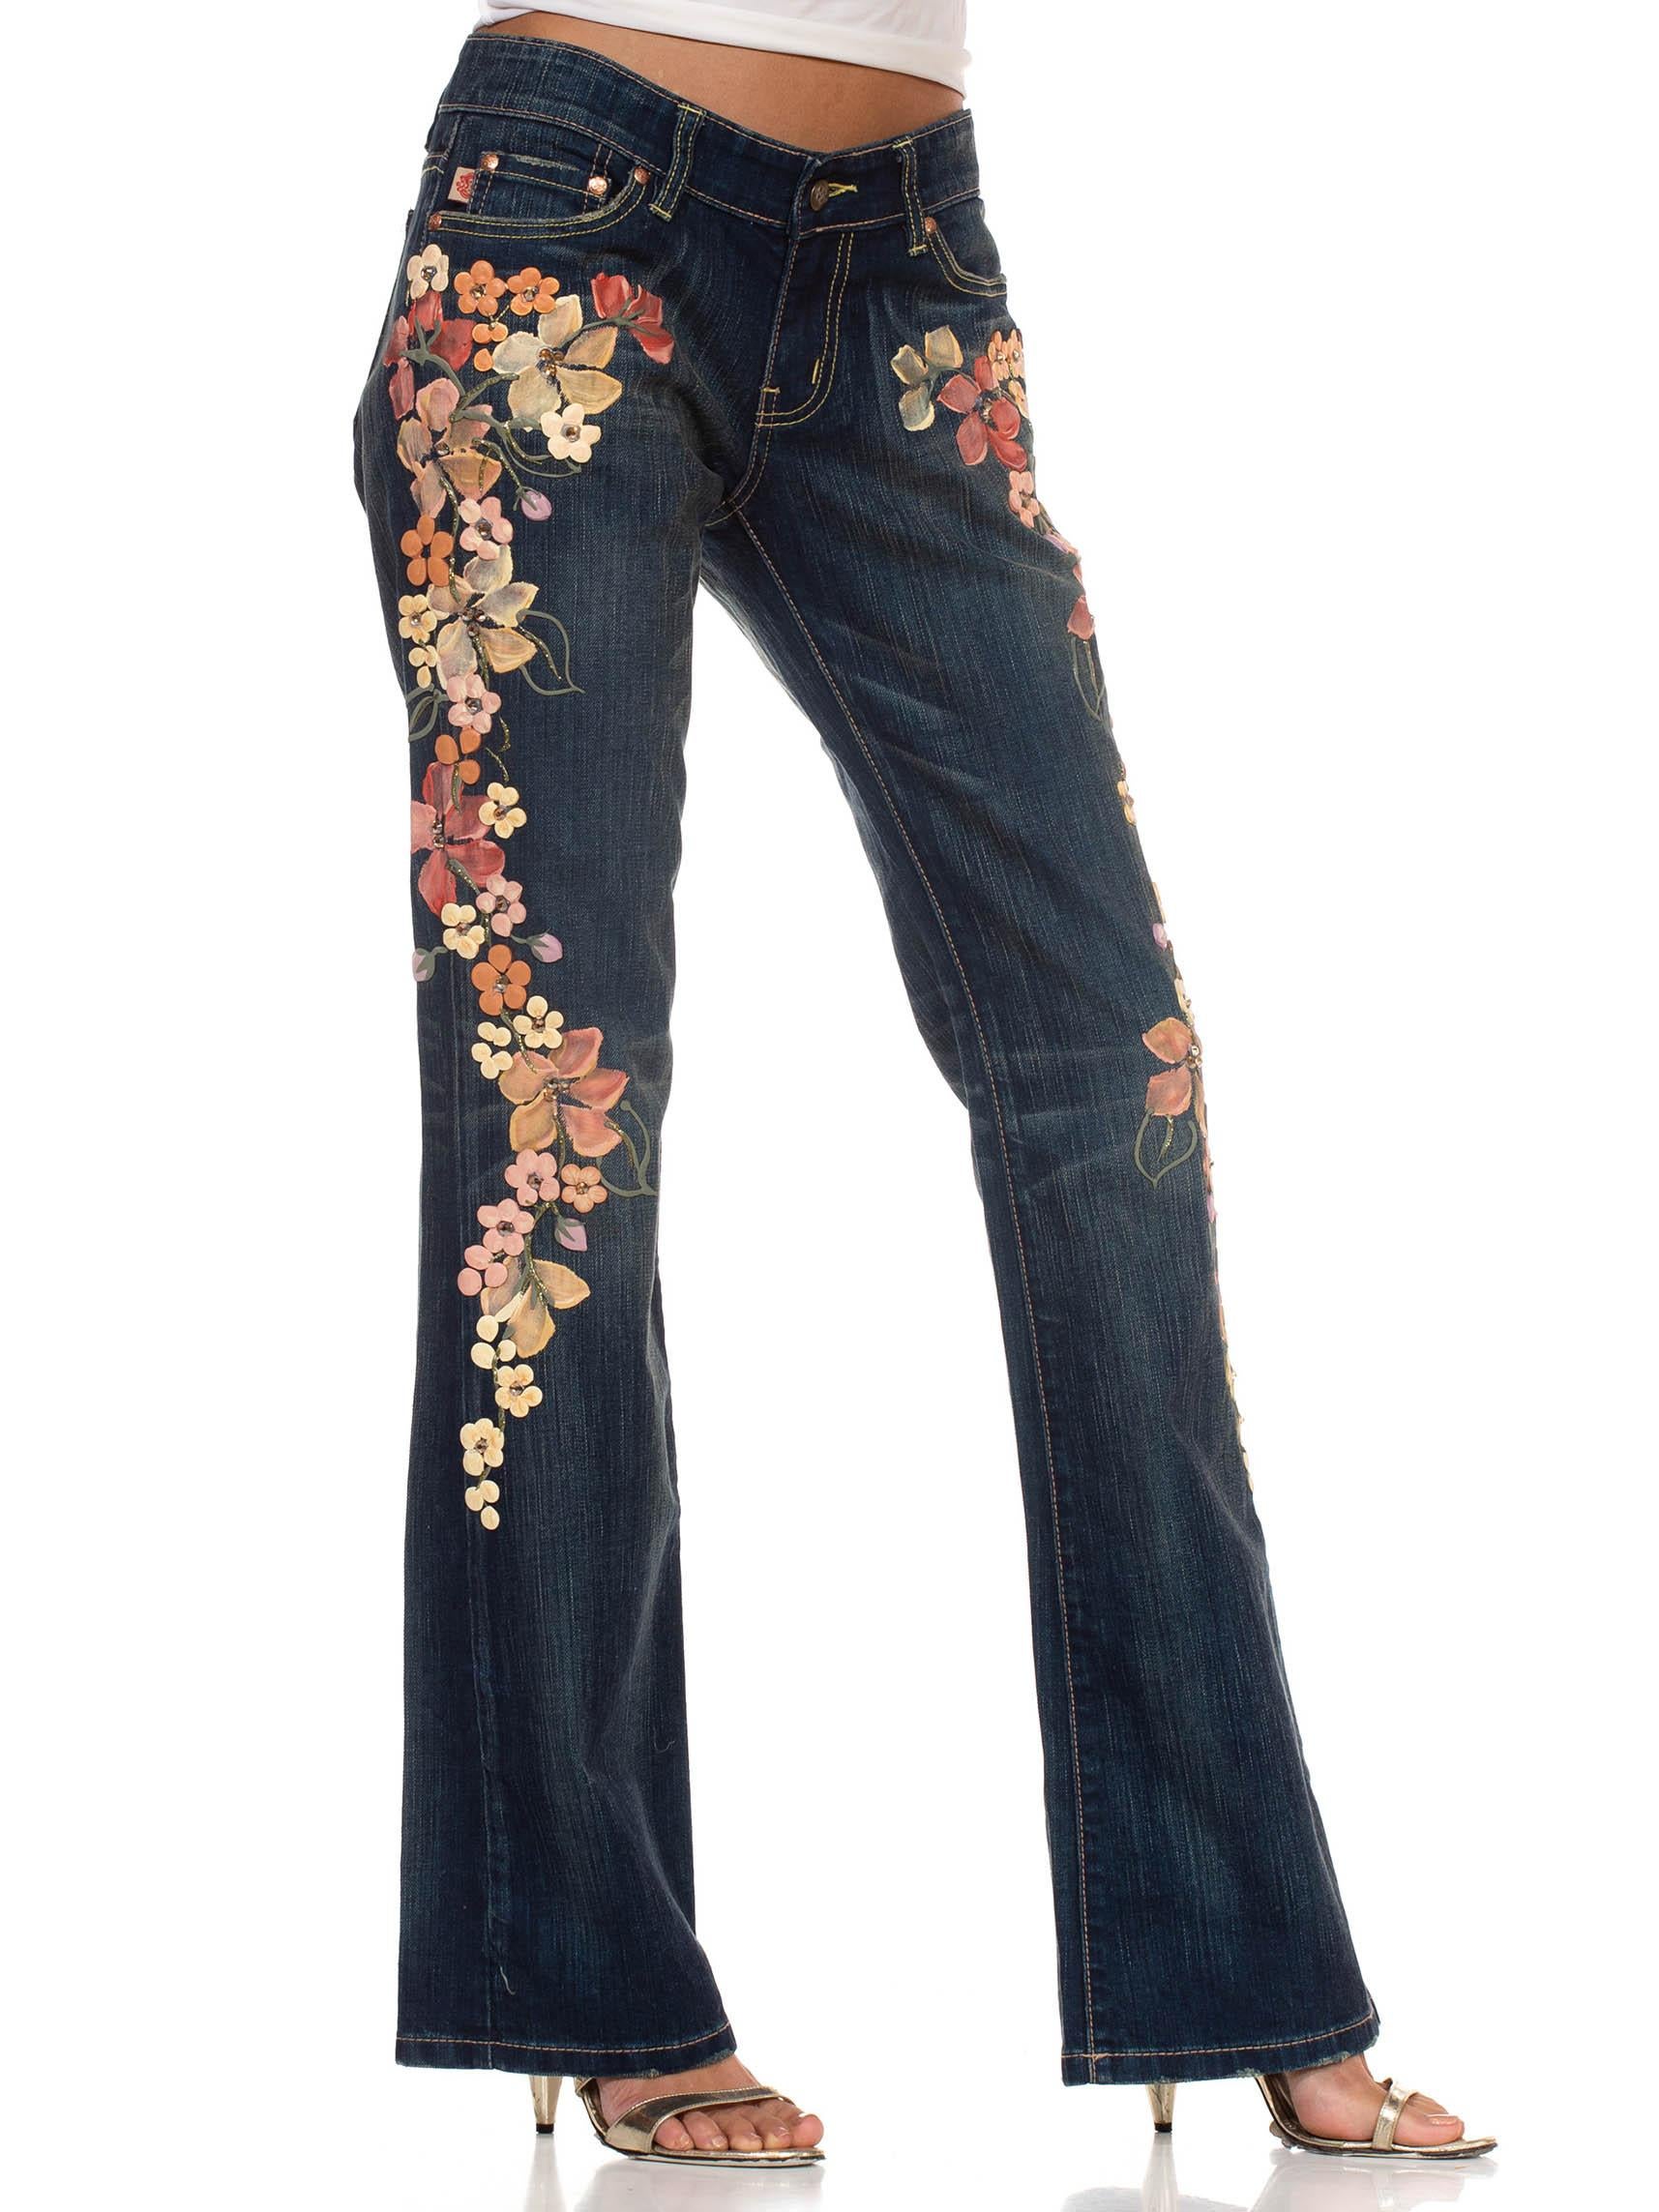 1990S EMA SAVAHL Cotton & Spandex Denim Jeans With Floral Puffy Paint Crystal Design